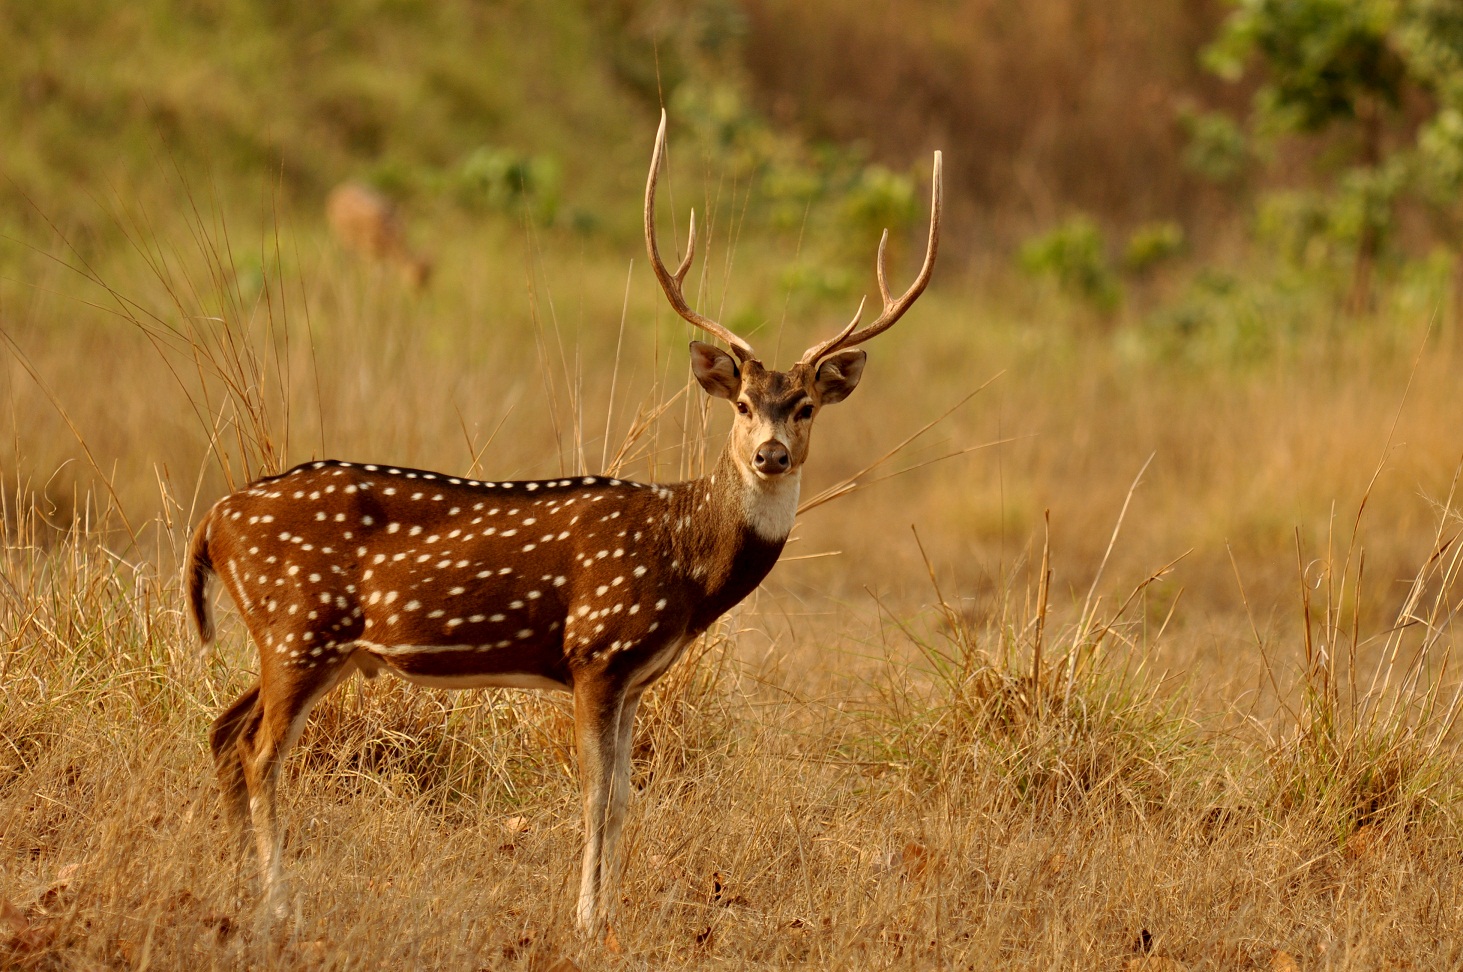 Now death of a chital, some limbs disappear